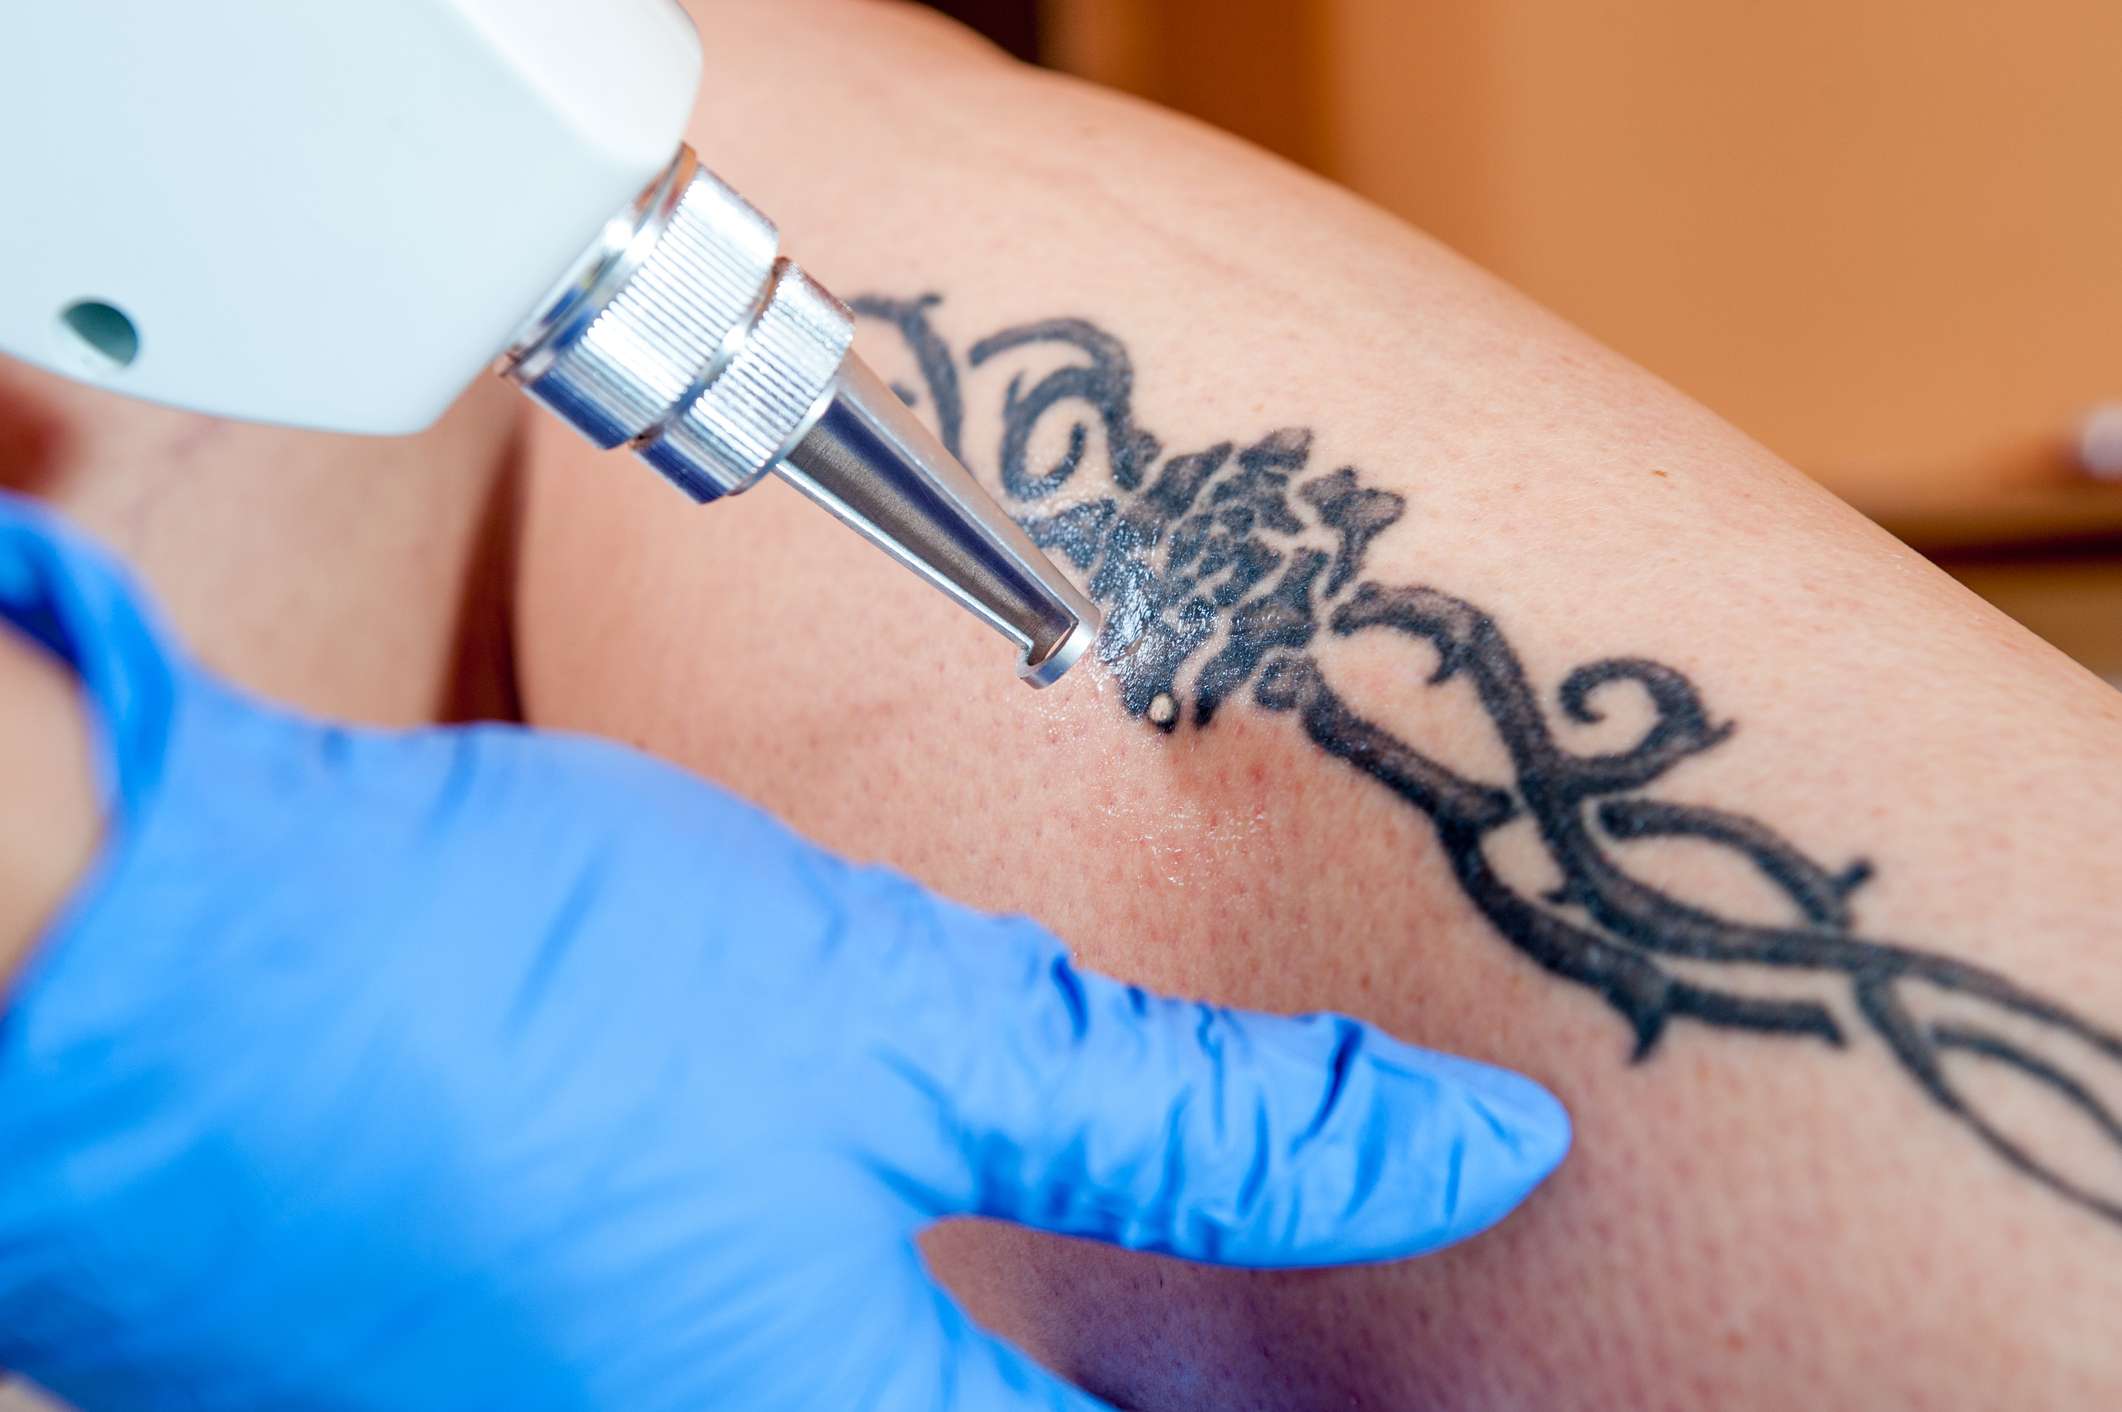 Would you like to remove your tattoo? 4 techniques that help